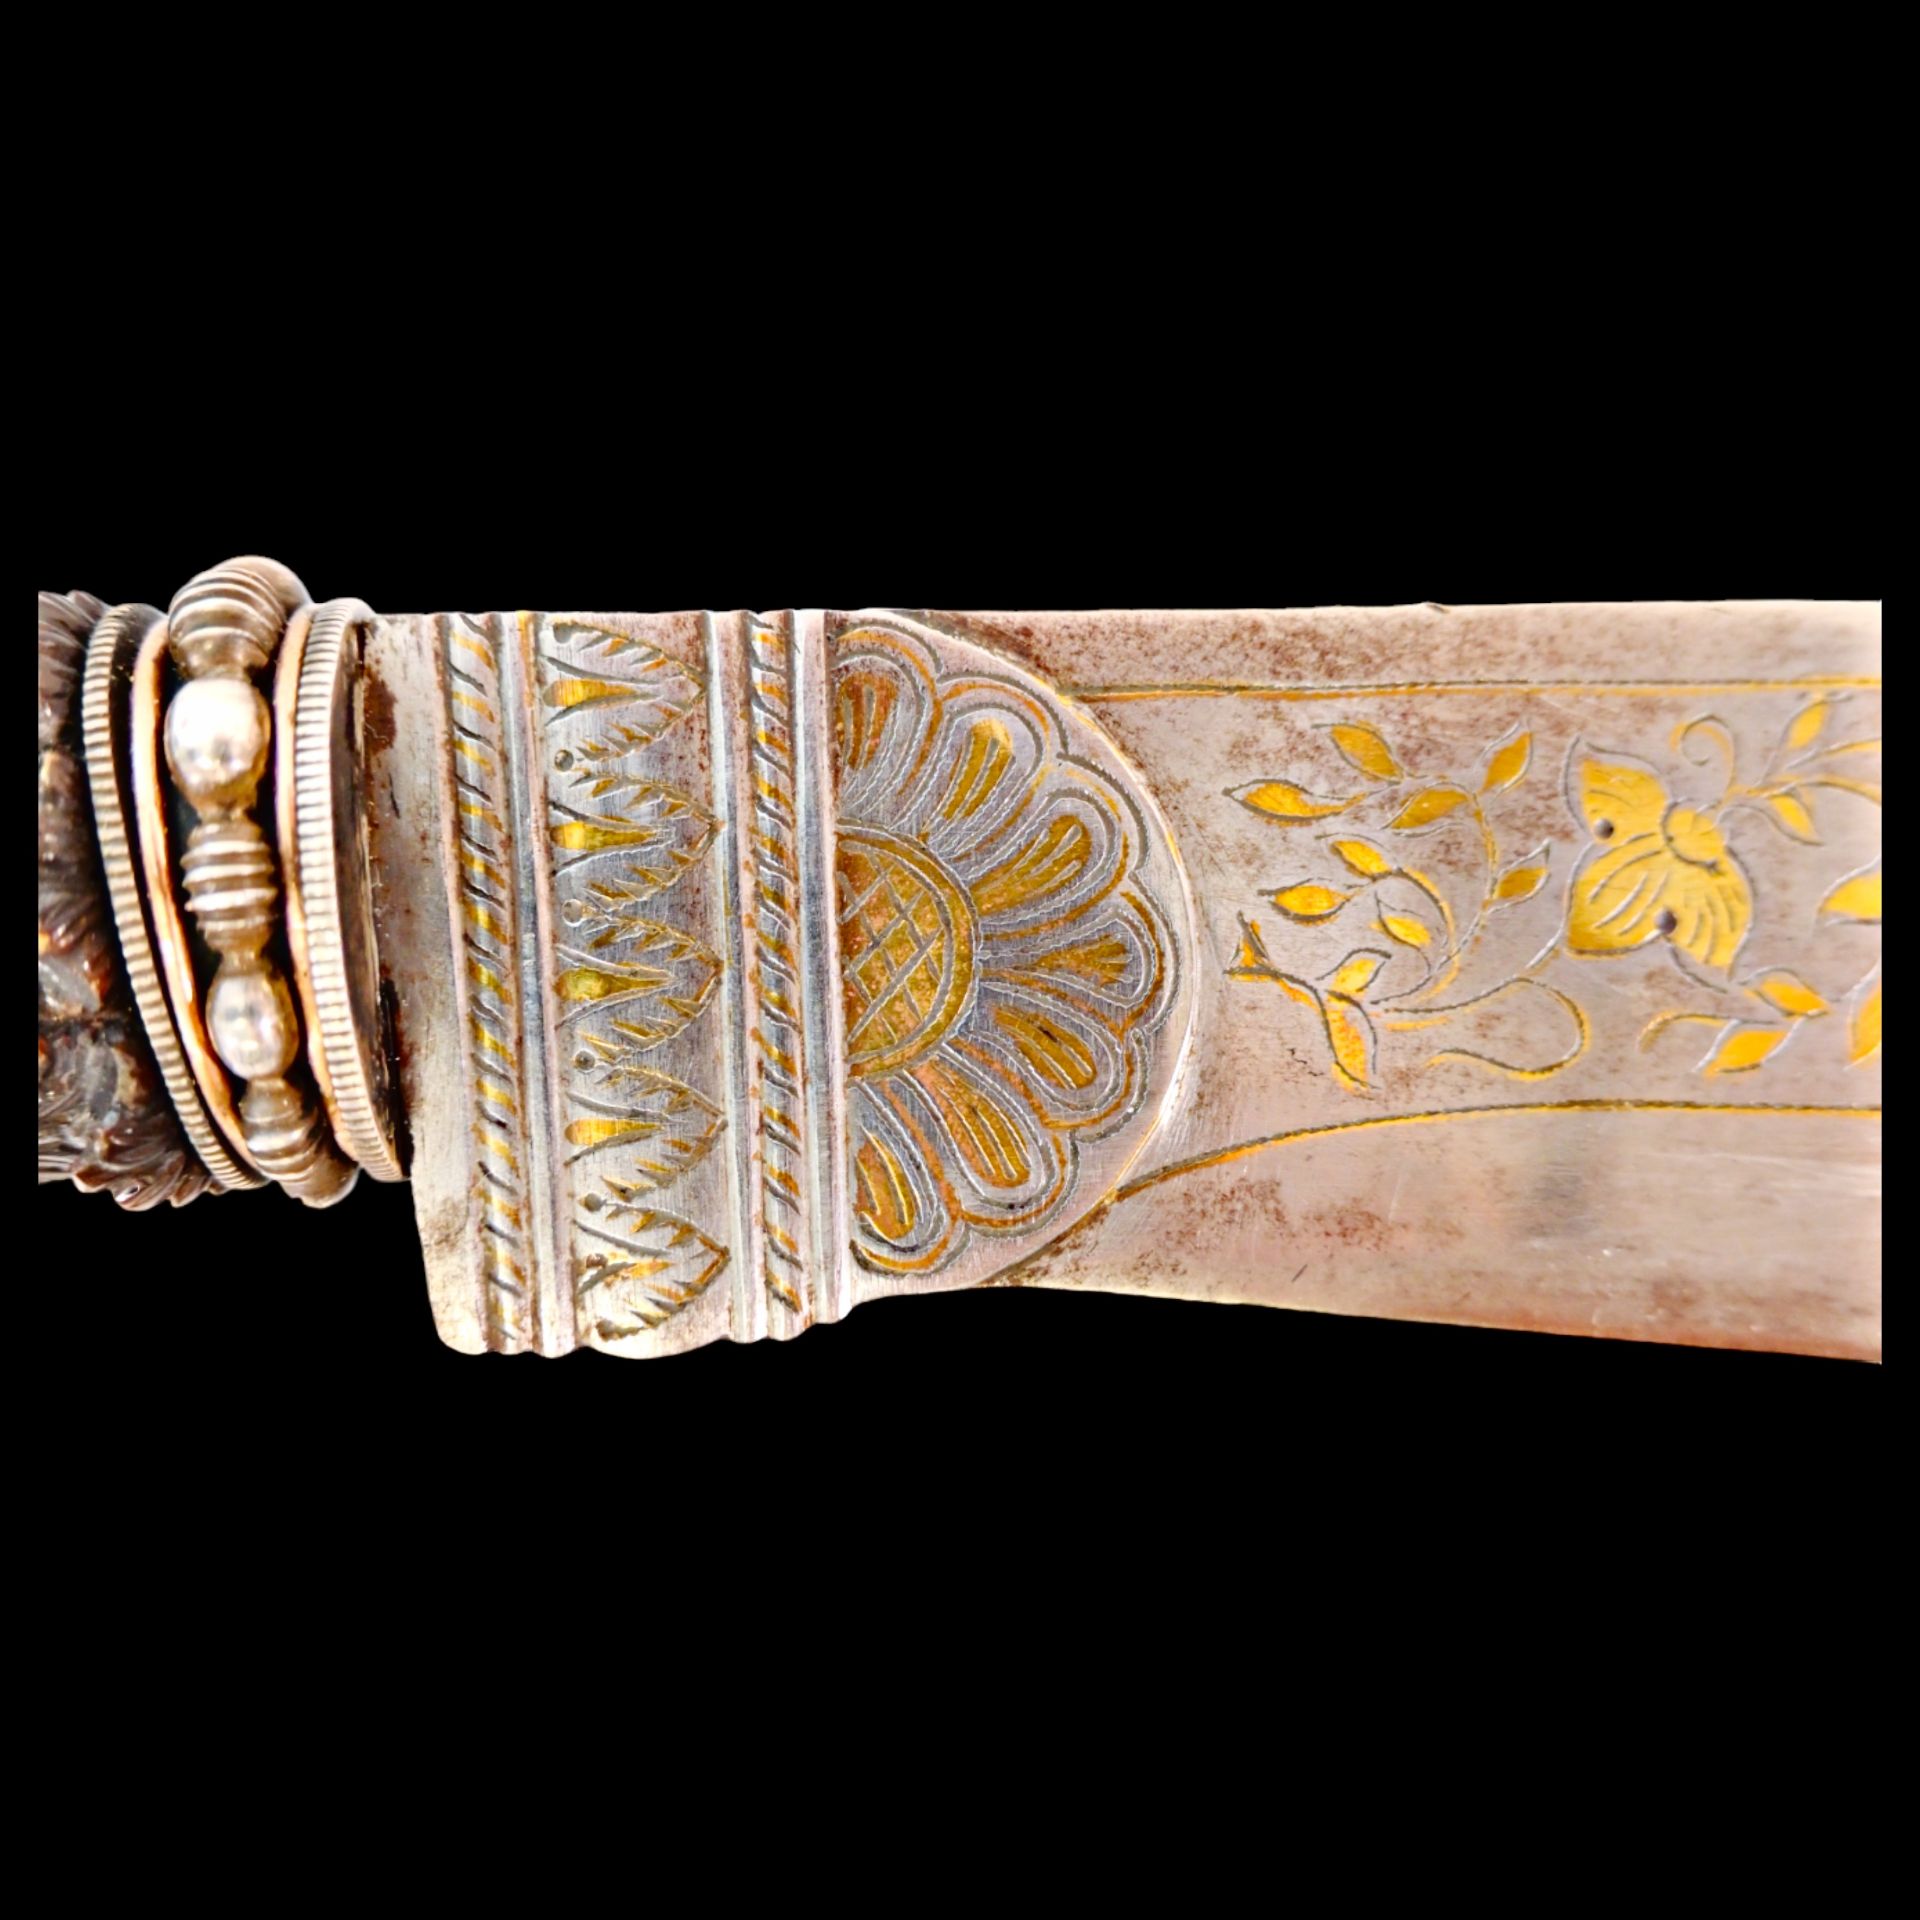 Magnificent, richly decorated knife, Indonesia, first half of the 20th century. - Image 25 of 33